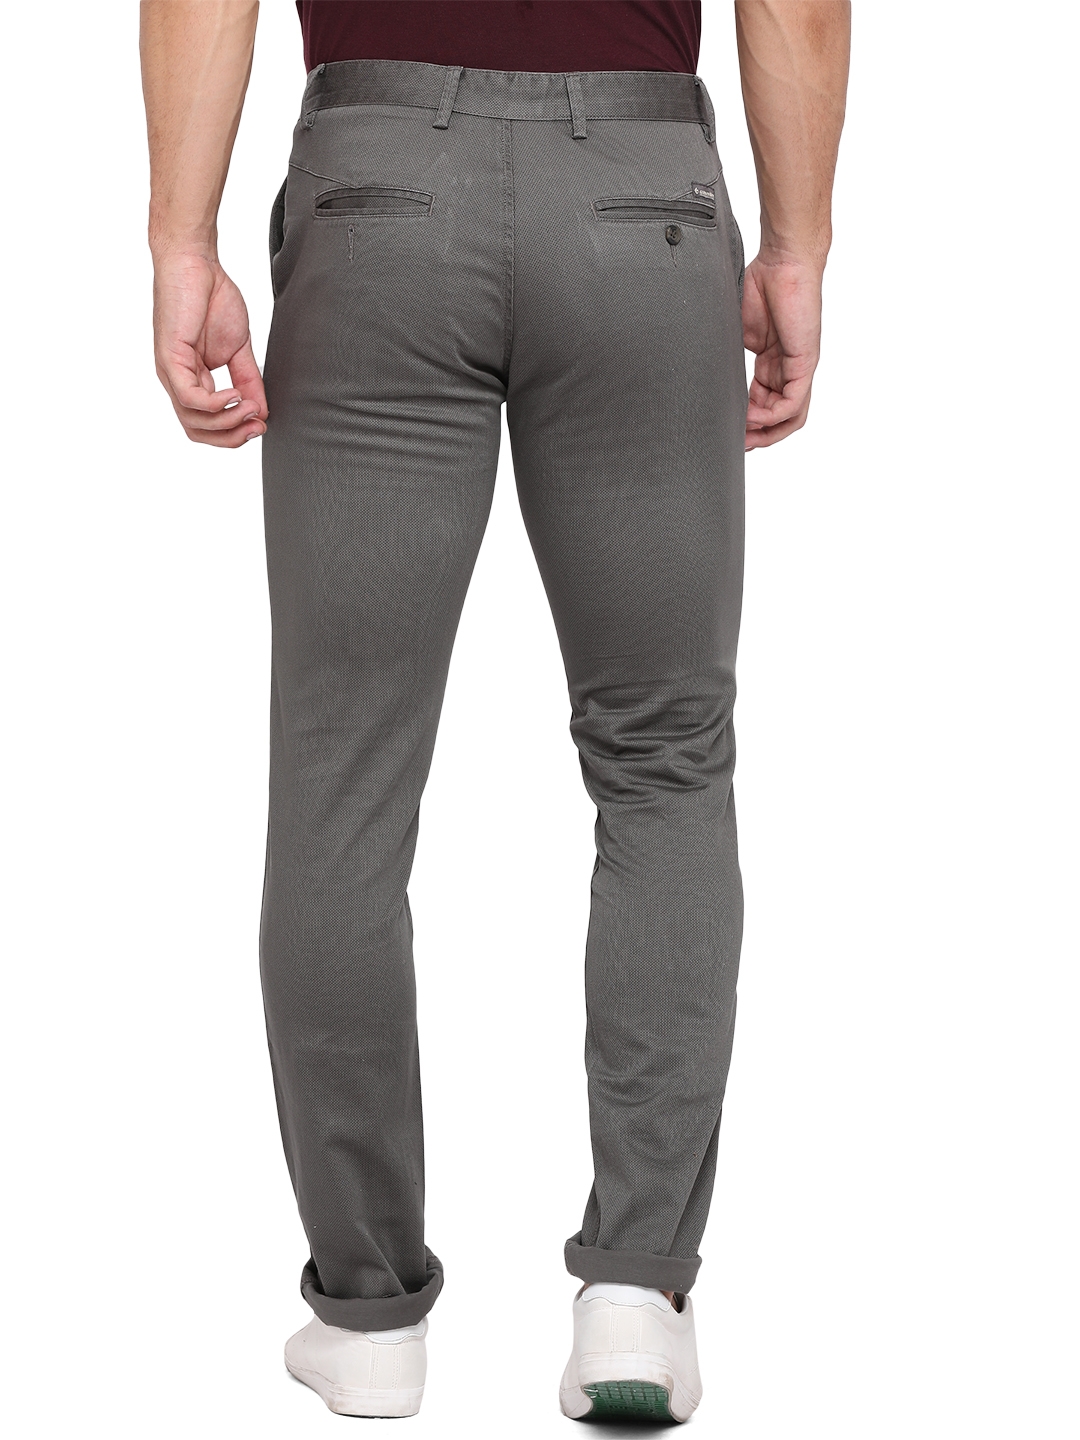 Greenfibre | Grey Solid Slim Fit Casual Trouser | Greenfibre 2